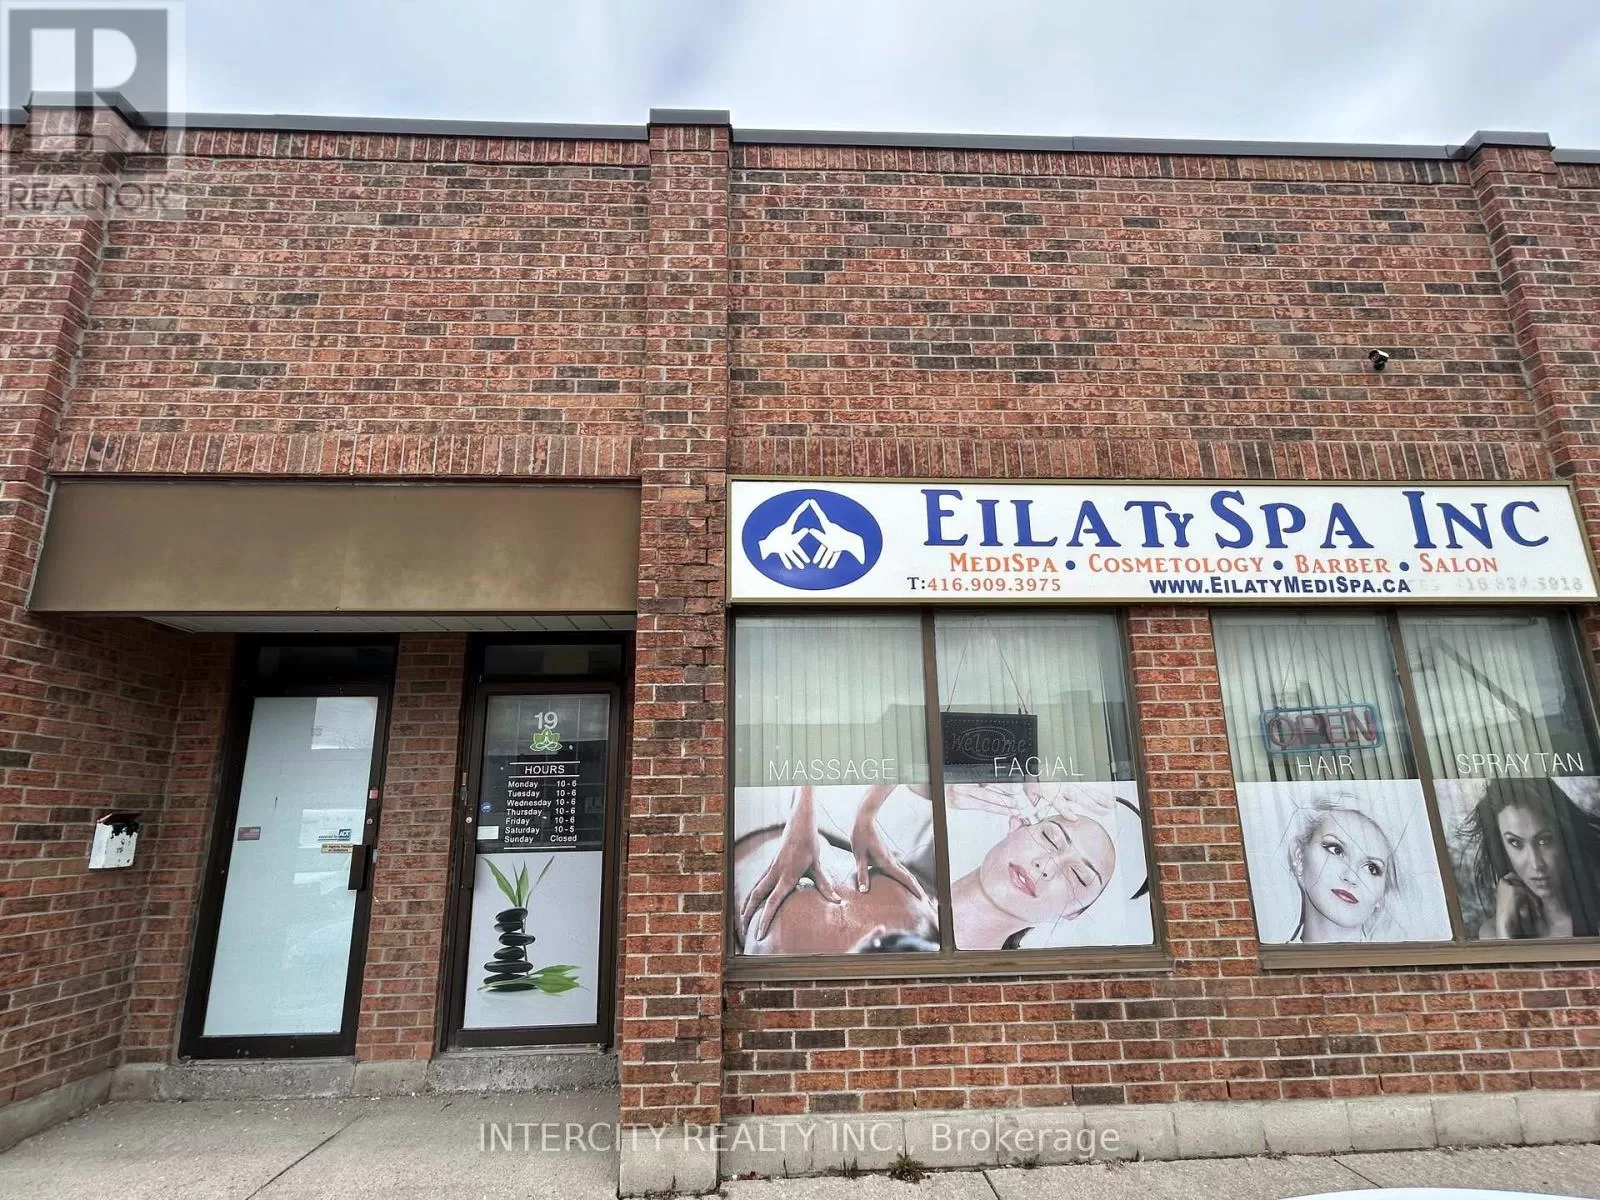 Retail for rent: #19 -467 Westney Rd S, Ajax, Ontario L1S 6V8